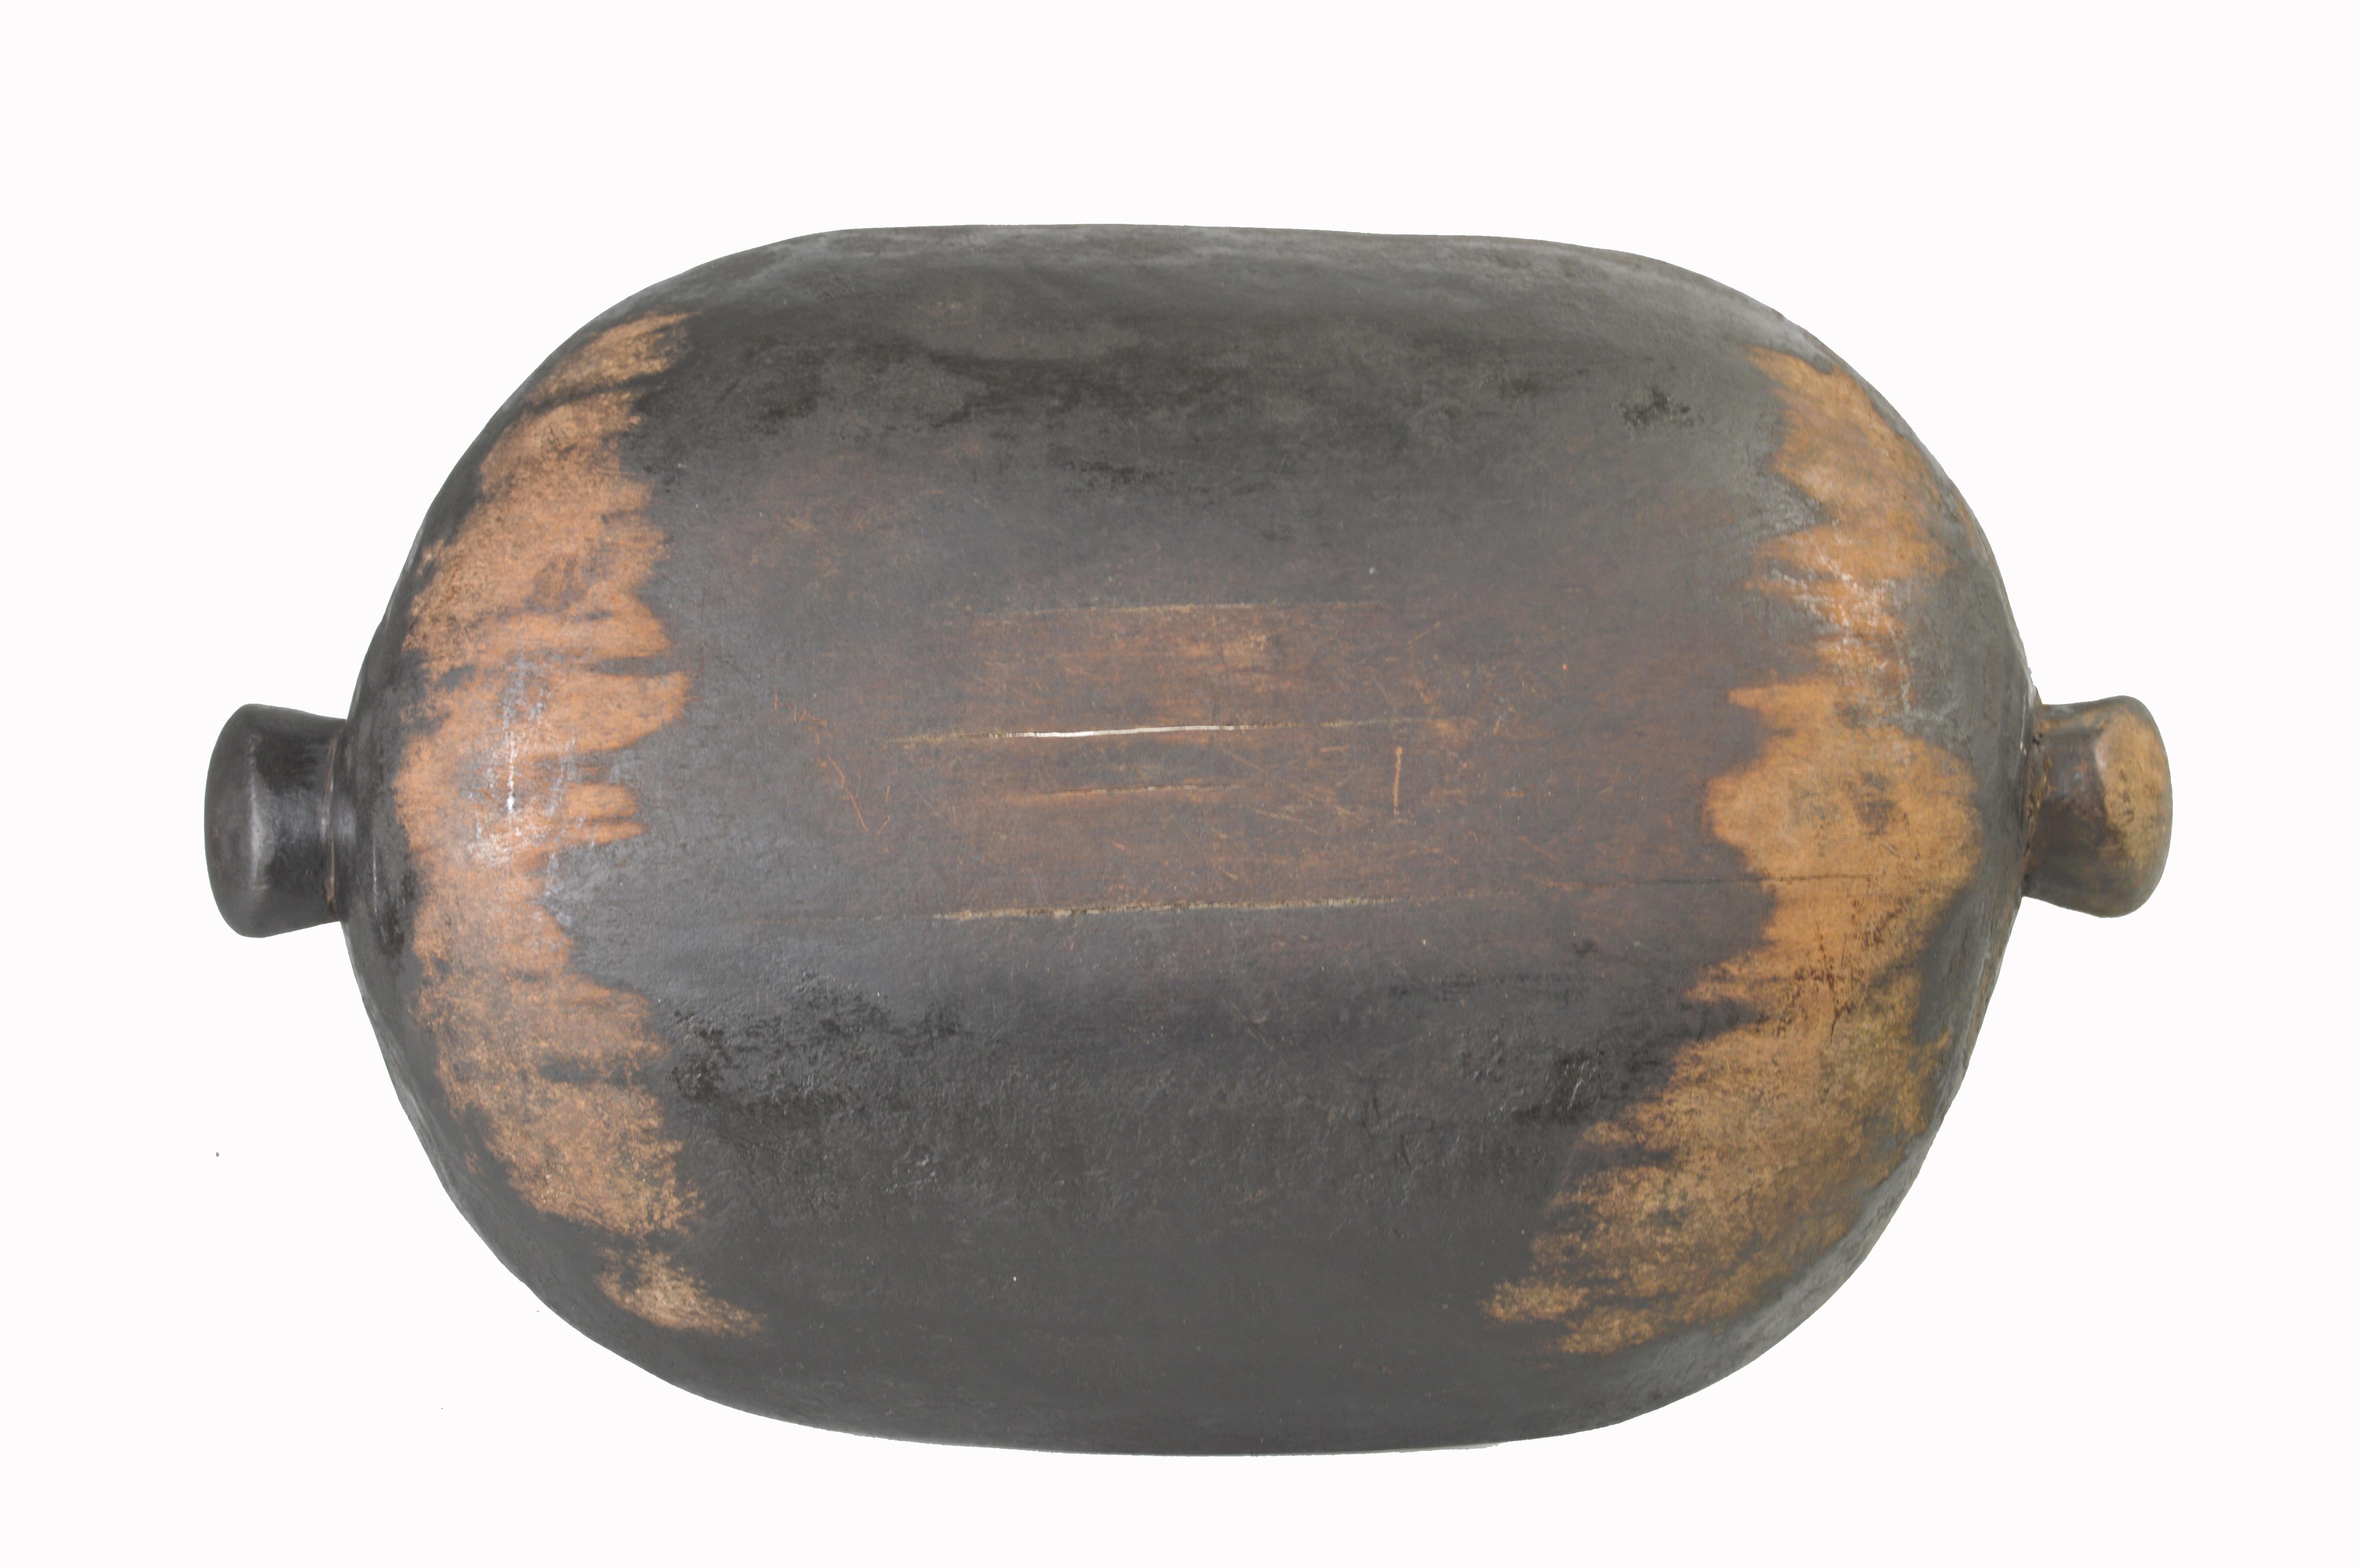 This is a large, early- to mid-twentieth century food bowl from the Grassfields peoples of Cameroon. The presence of spouts at either end of the bowl, its rich patina and extensive signs of use suggest that it was a vessel for serving moist stews